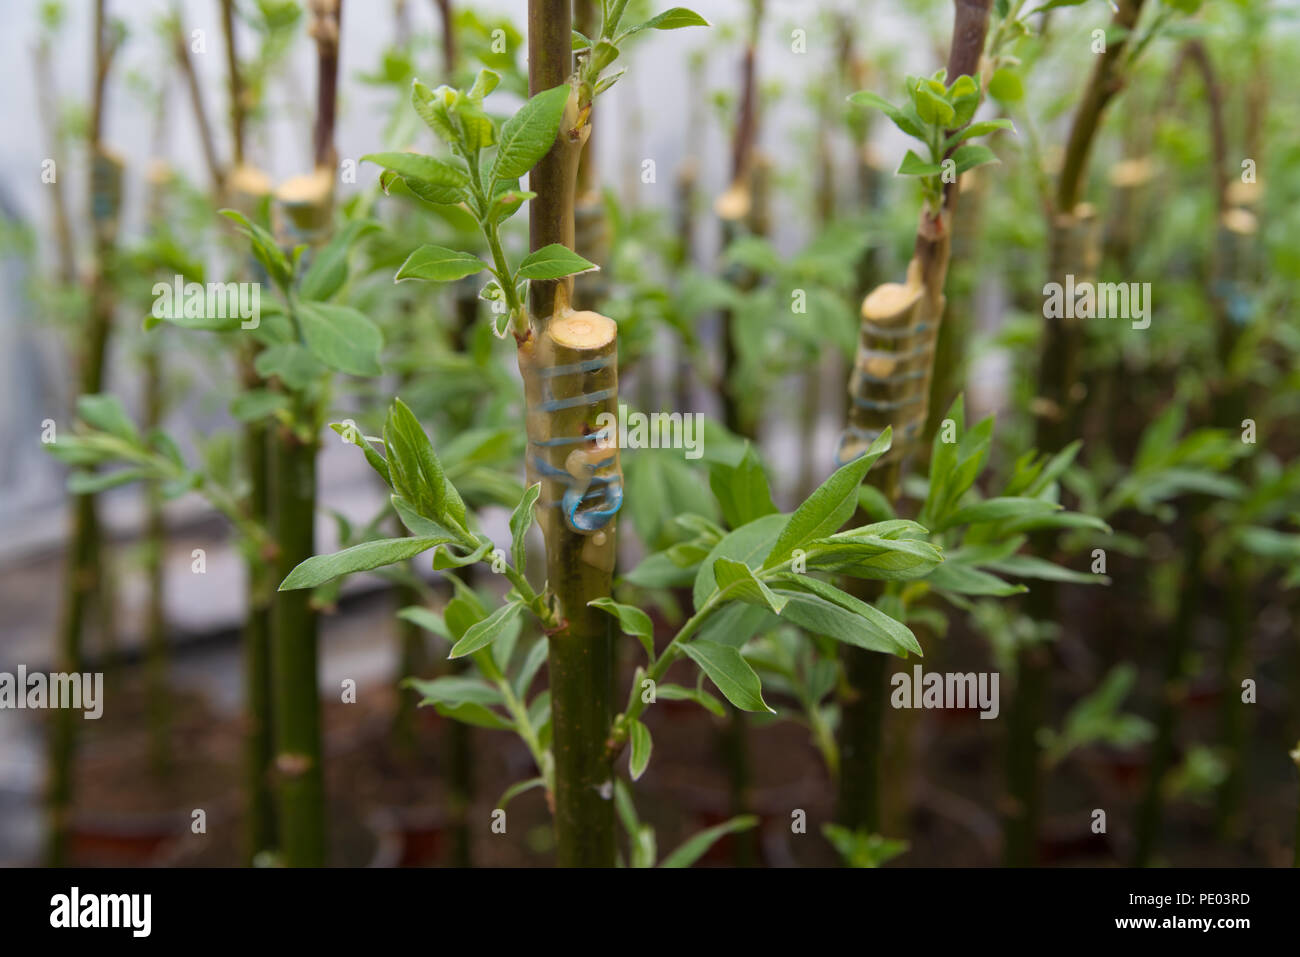 grafting on young willow trees in a greenhouse Stock Photo